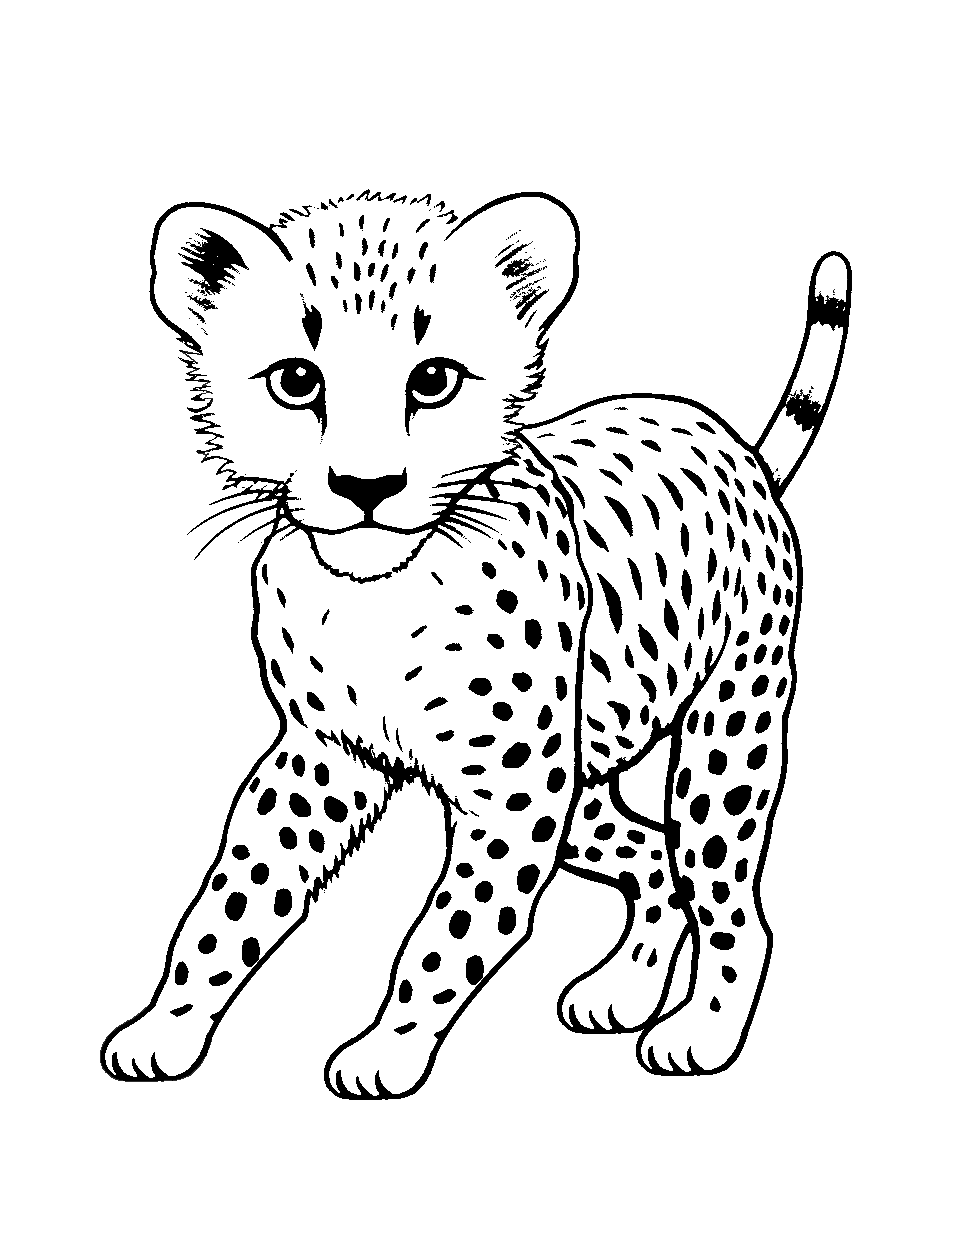 Cheetah Cub's First Hunt Coloring Page - A cheetah cub attempting its first hunt, looking focused.